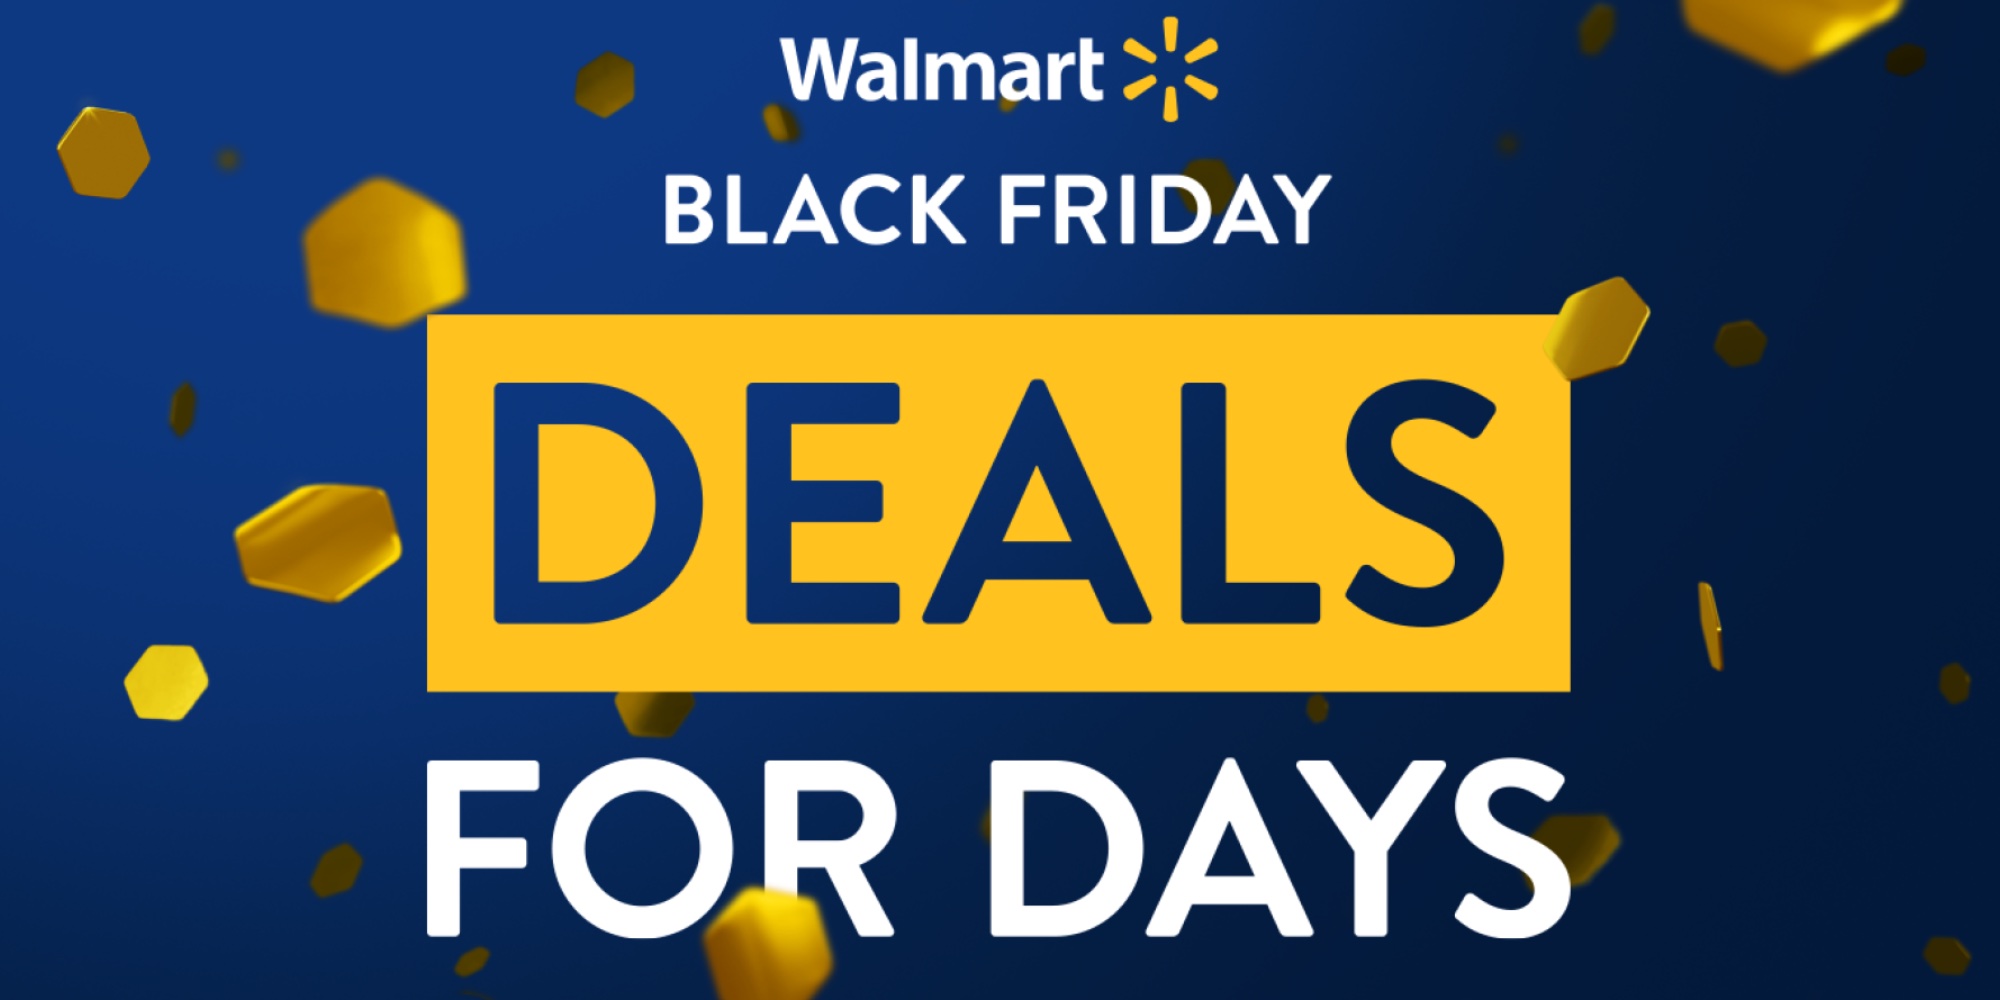 Walmart Black Friday sale goes live in Deals for Days event